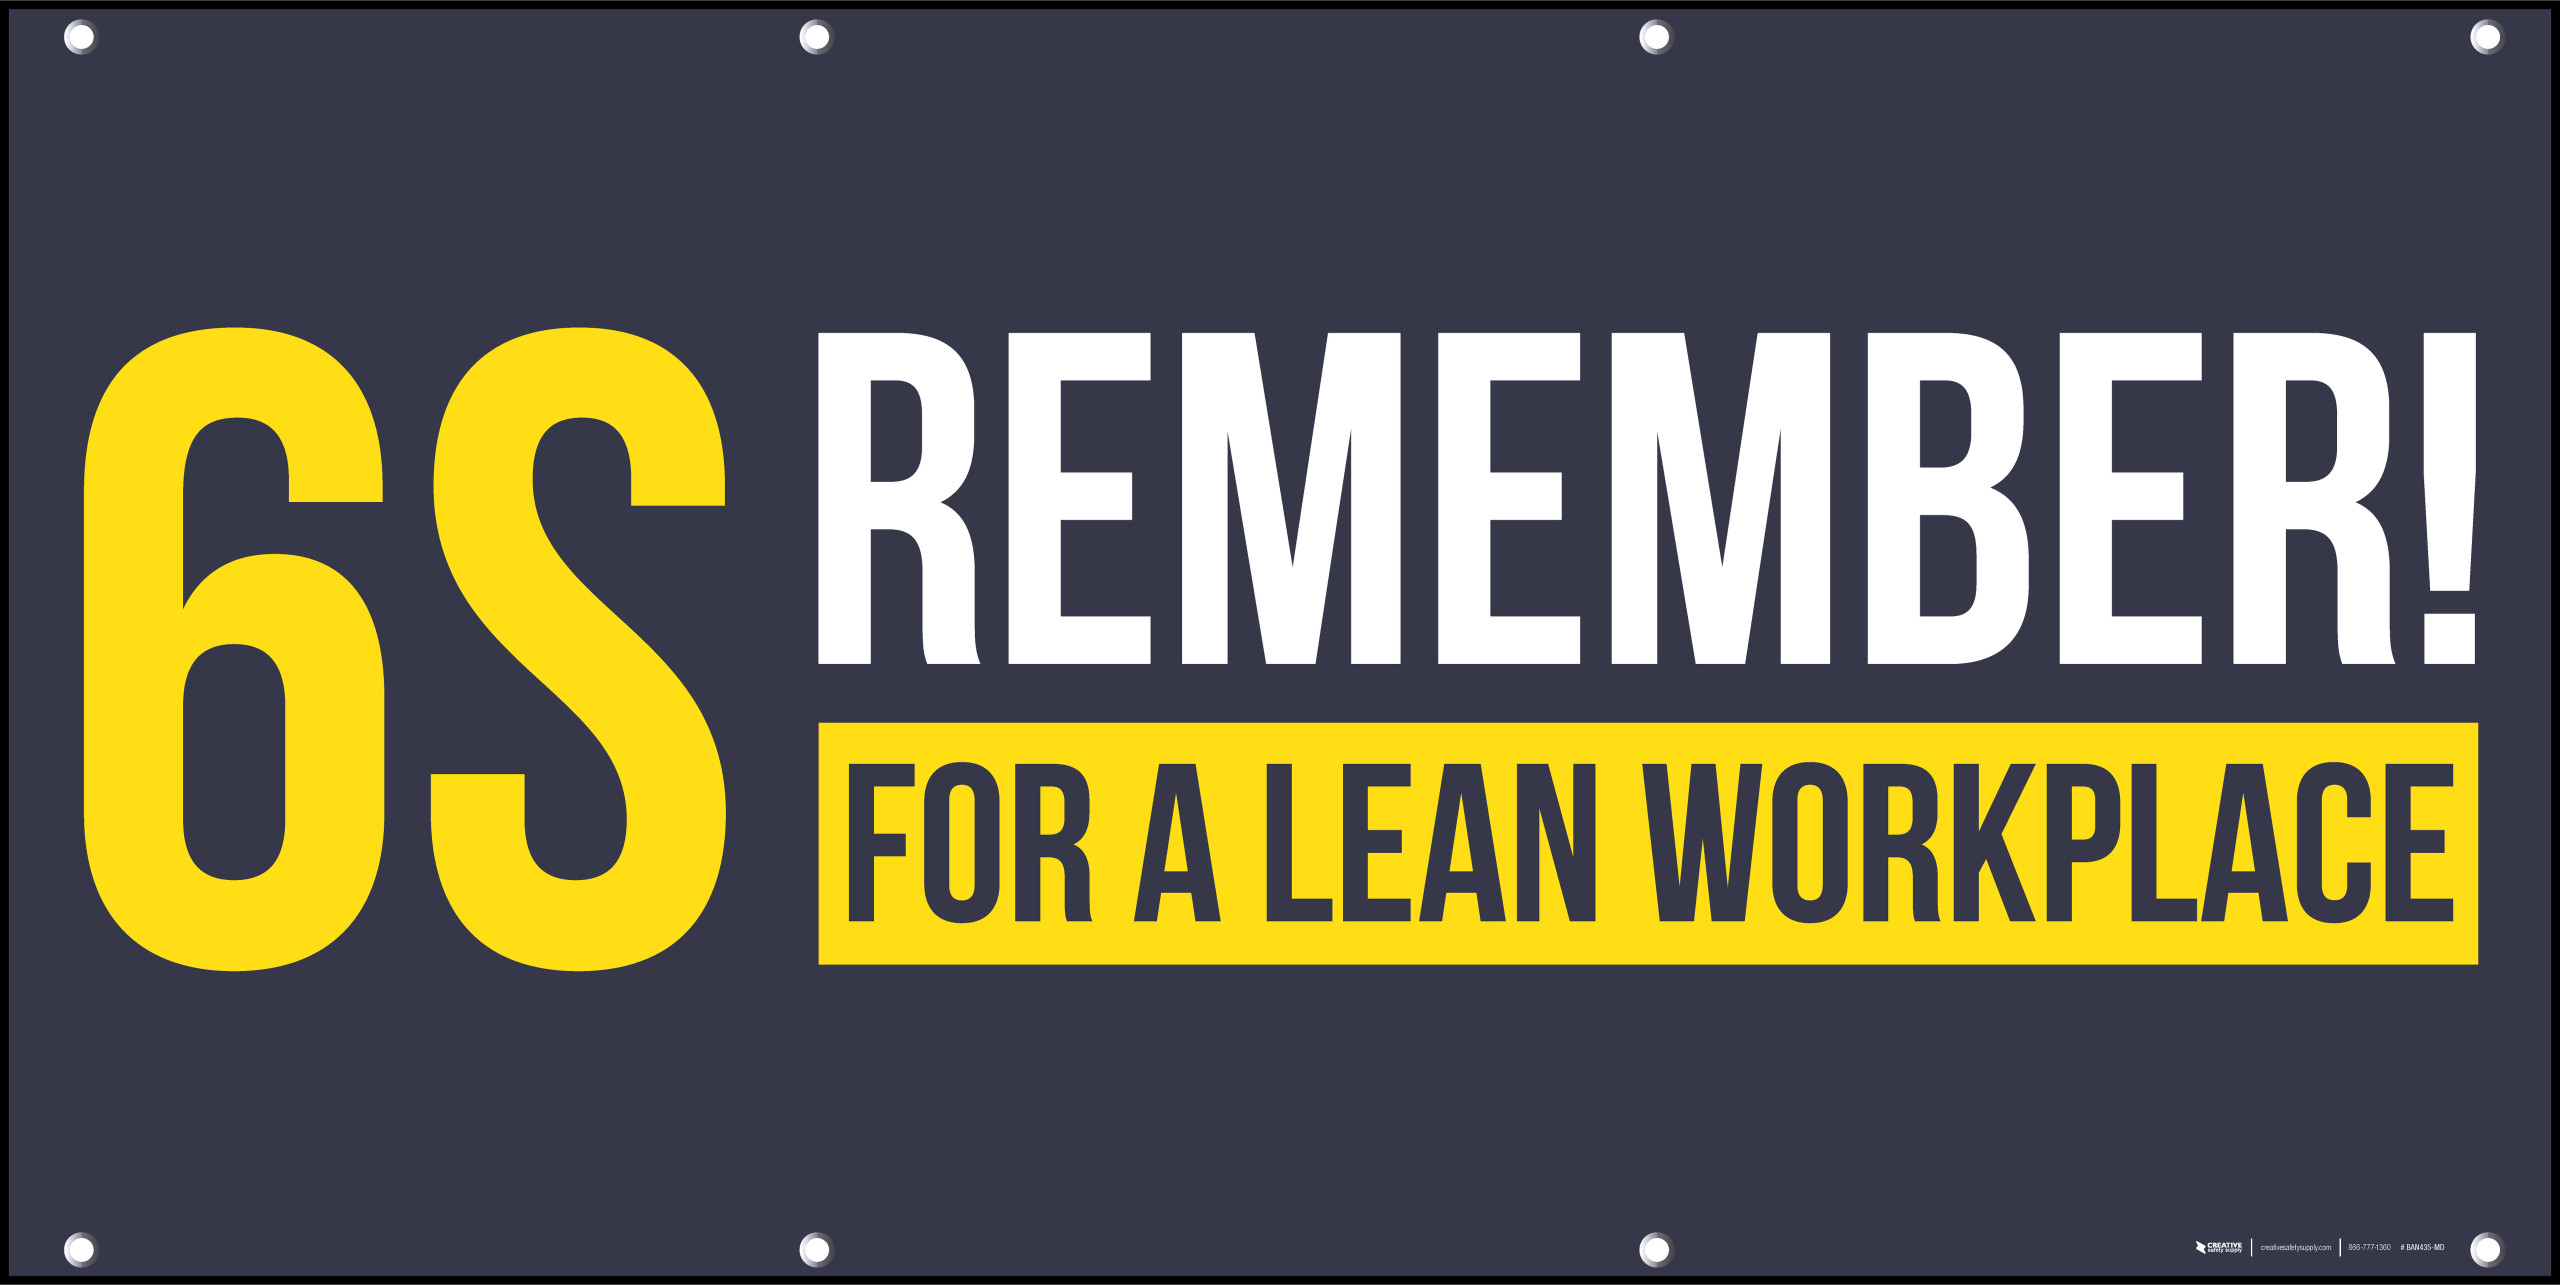 6s Remember For A Lean Workplace Banner 2340